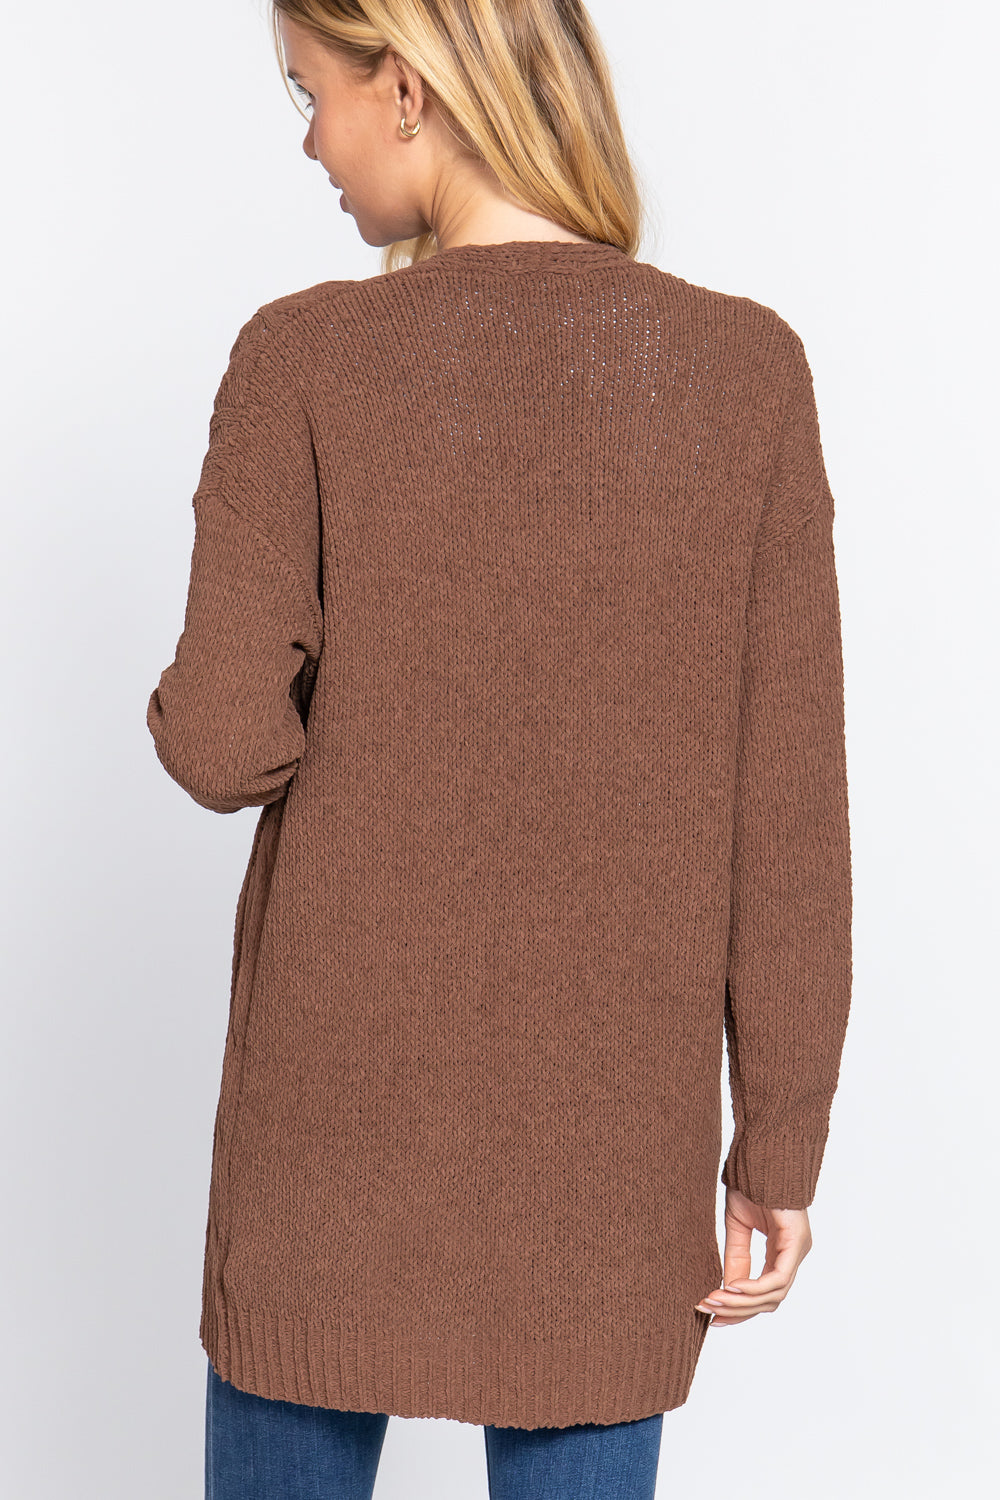 Brown Long Sleeve Chenille Sweater Cardigan ccw